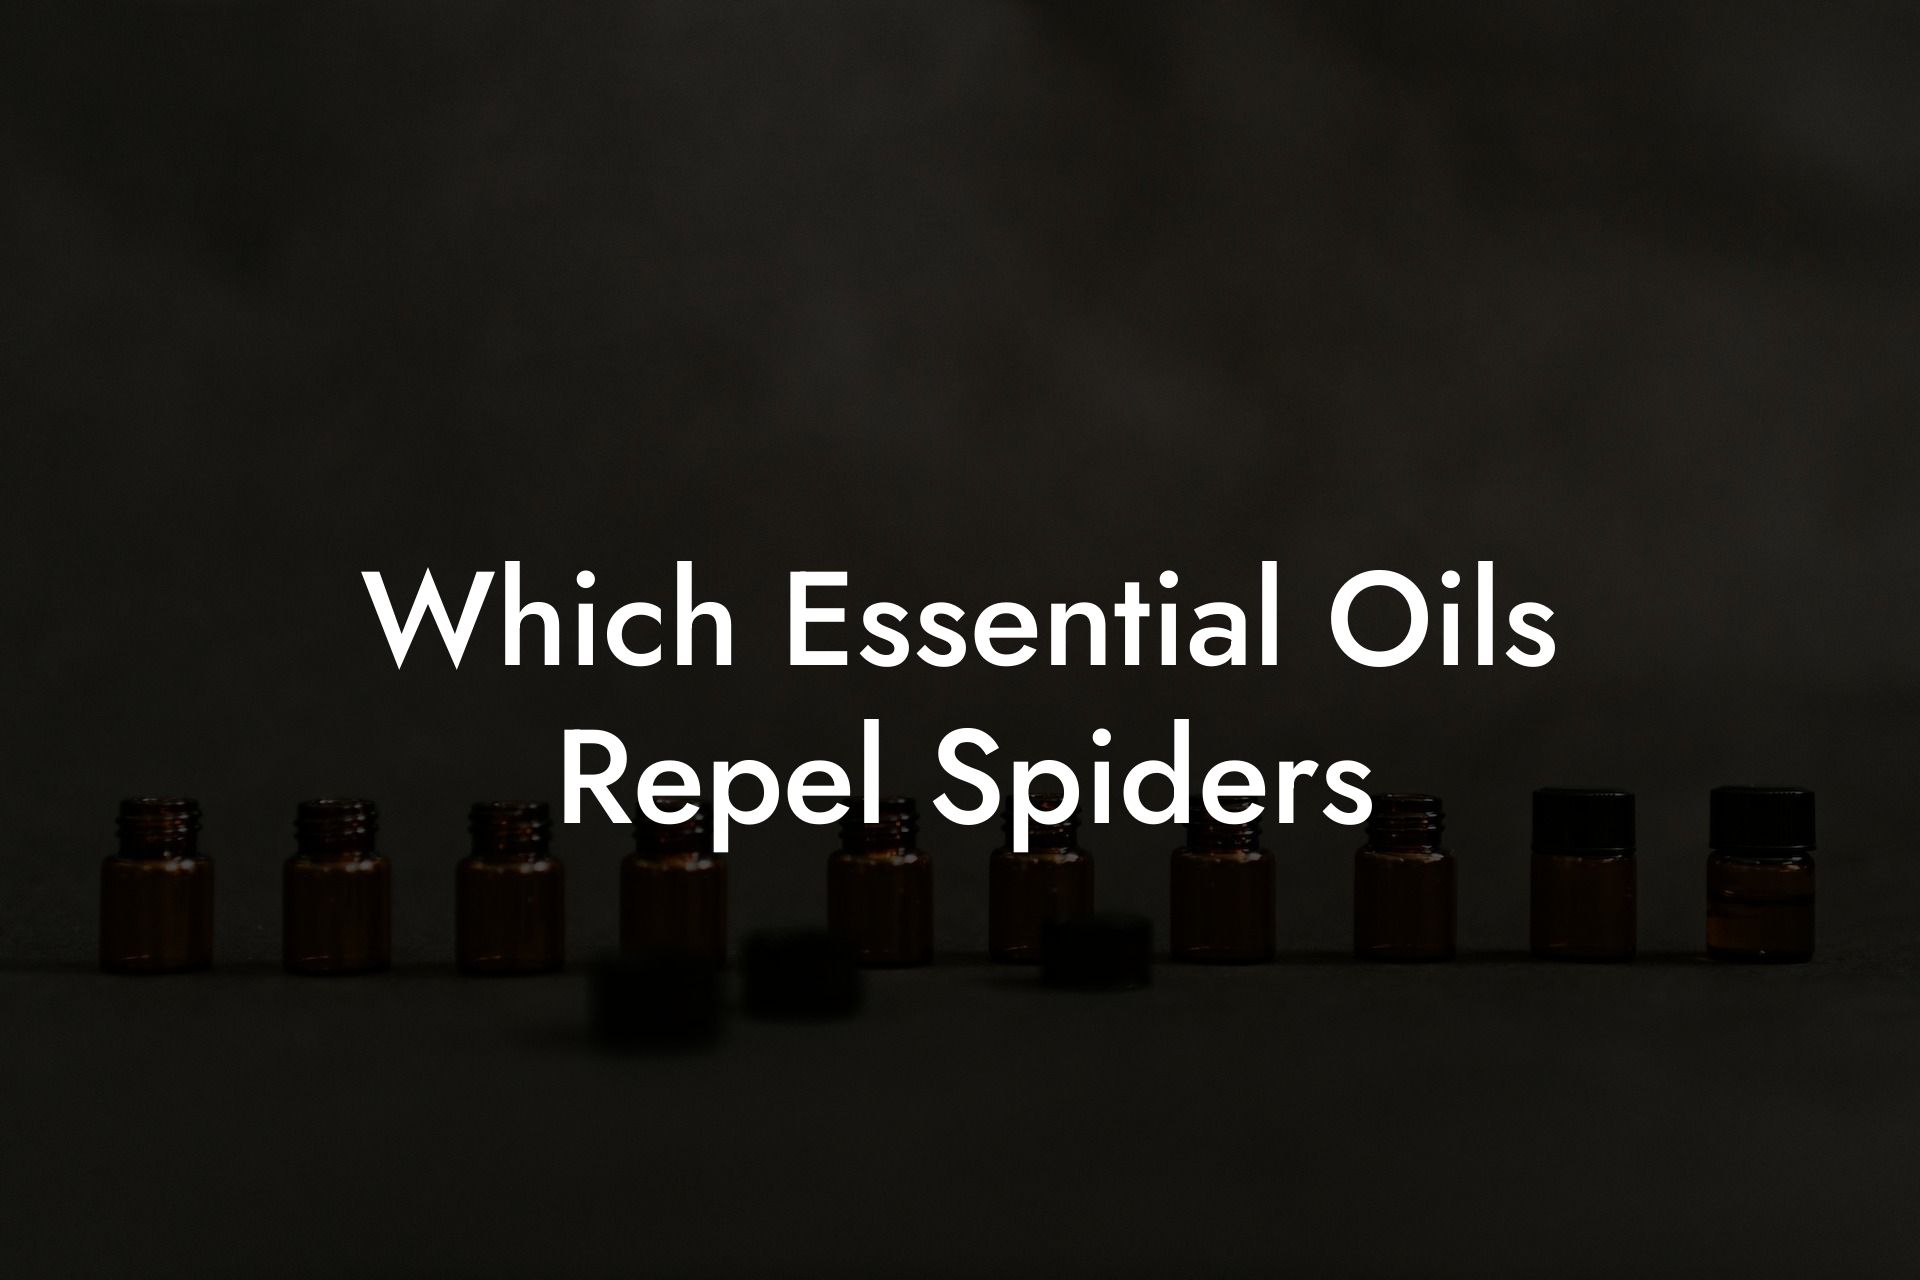 Which Essential Oils Repel Spiders